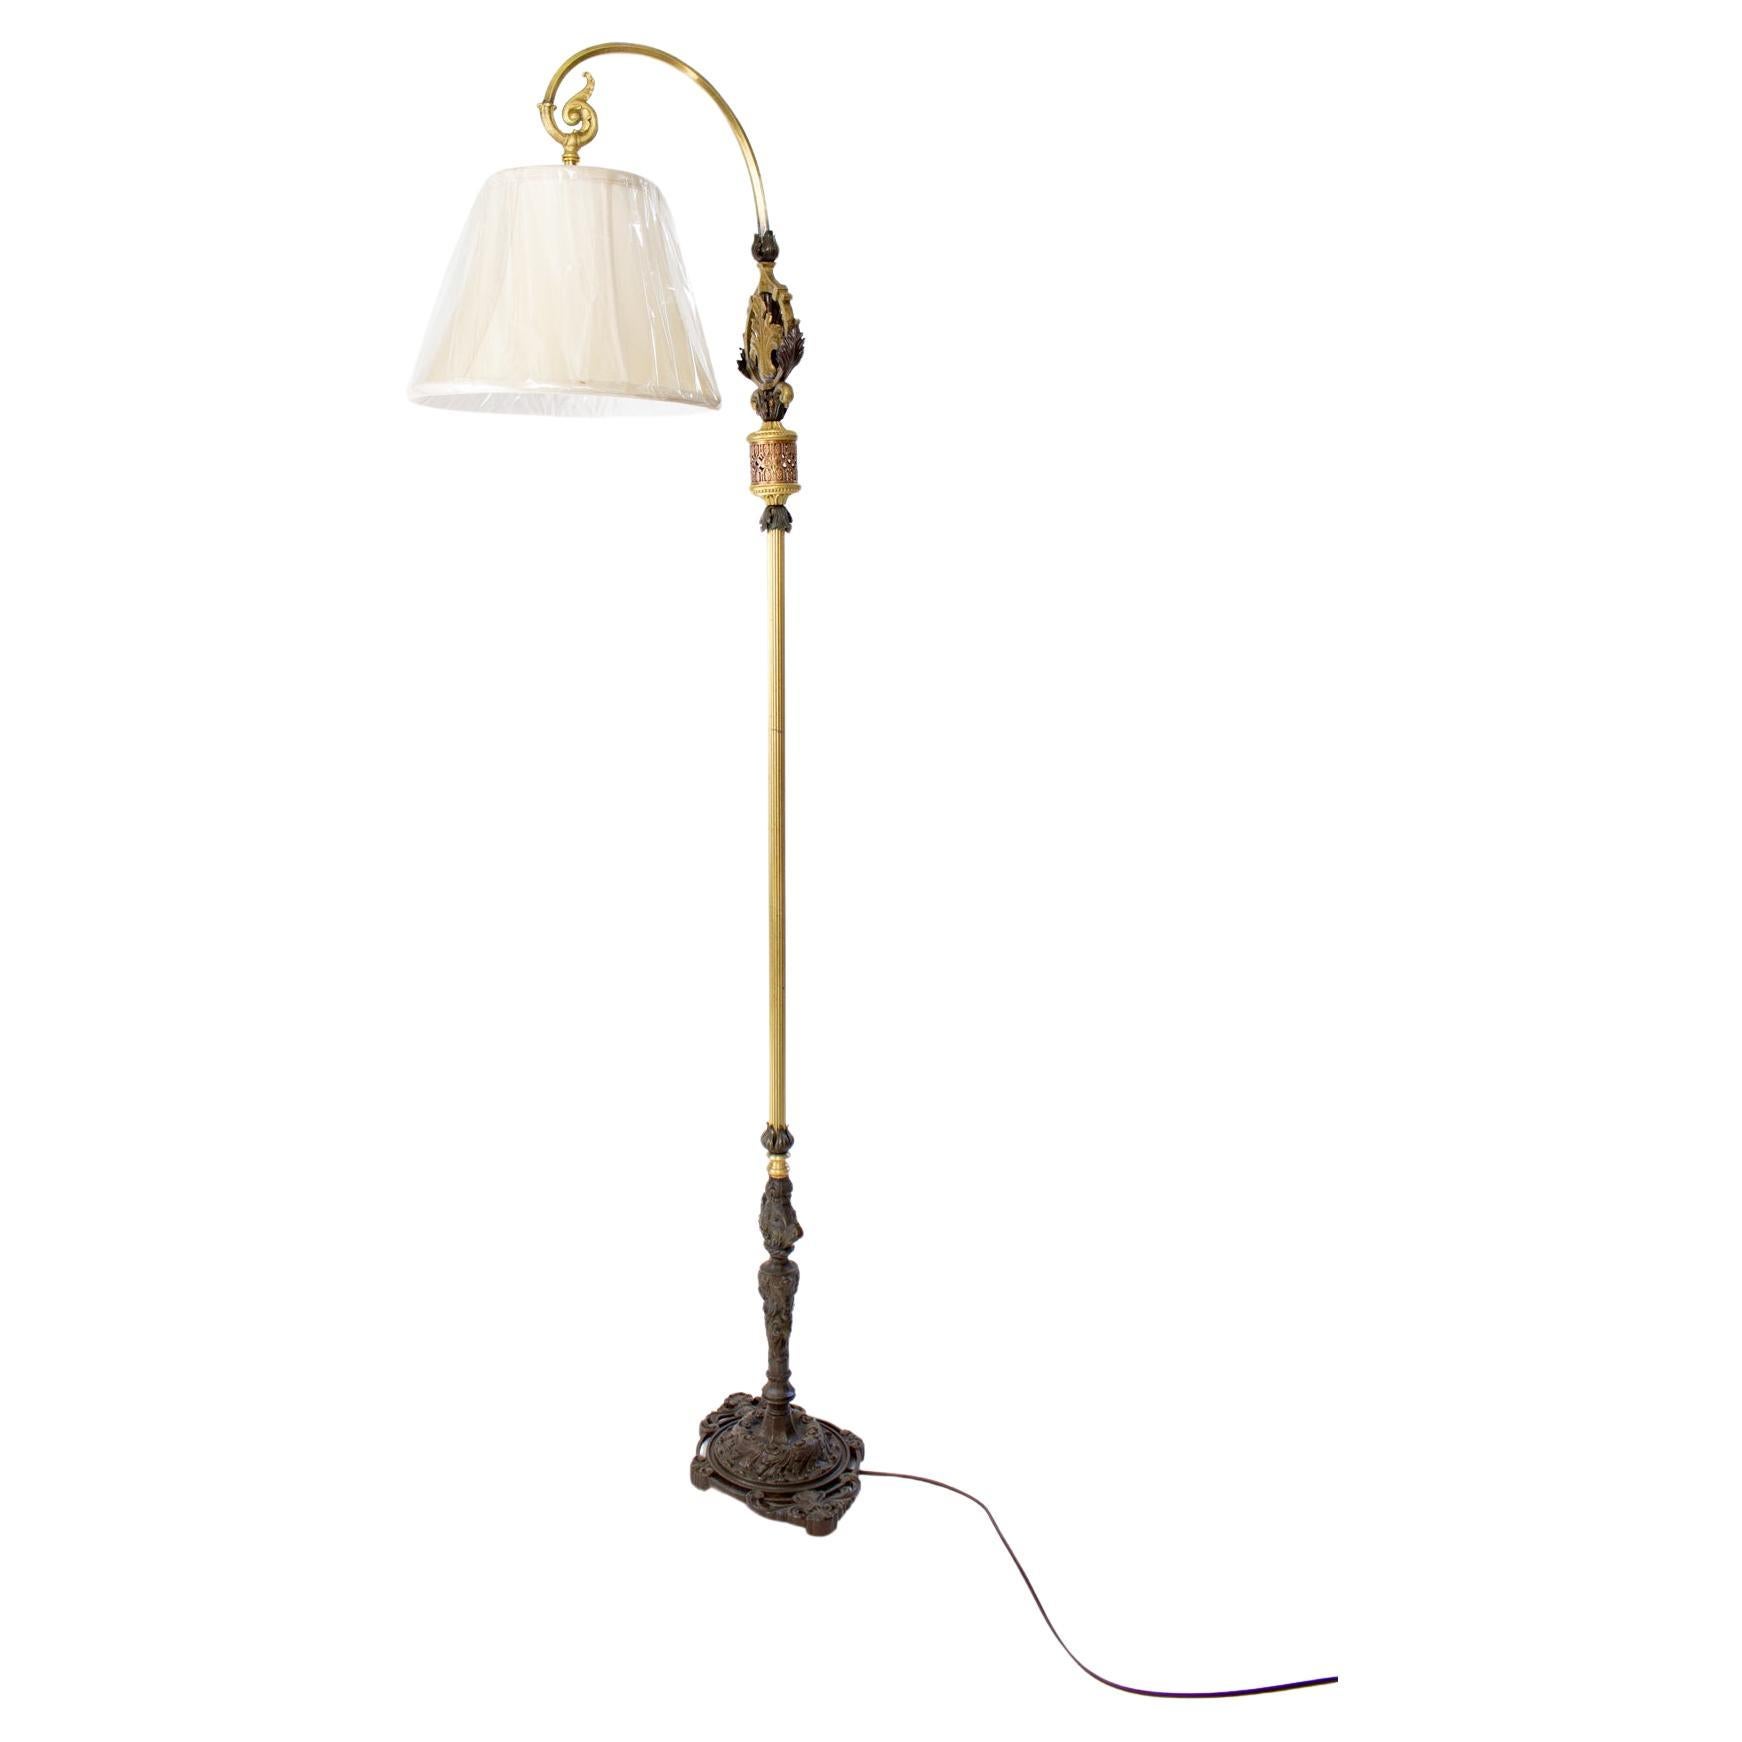 1920’s Rococo Revival Cast iron and Brass Bridge Lamp with Shade